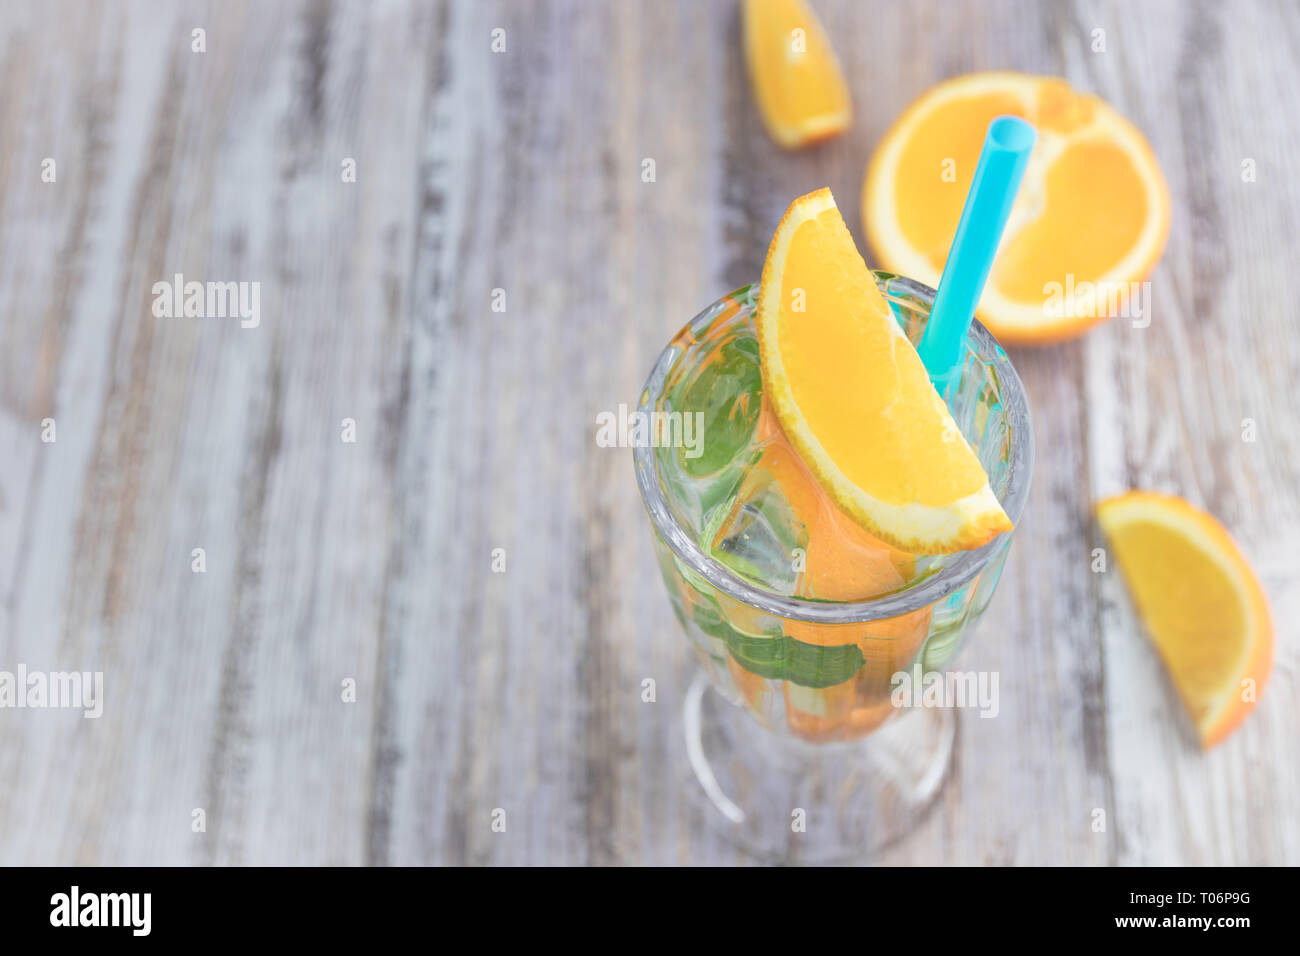 Citrus refreshing drink in a glass goblet on a wooden table. summer refreshing cocktail. Healthy food, drinks. orange and mint ice water. Copy space Stock Photo